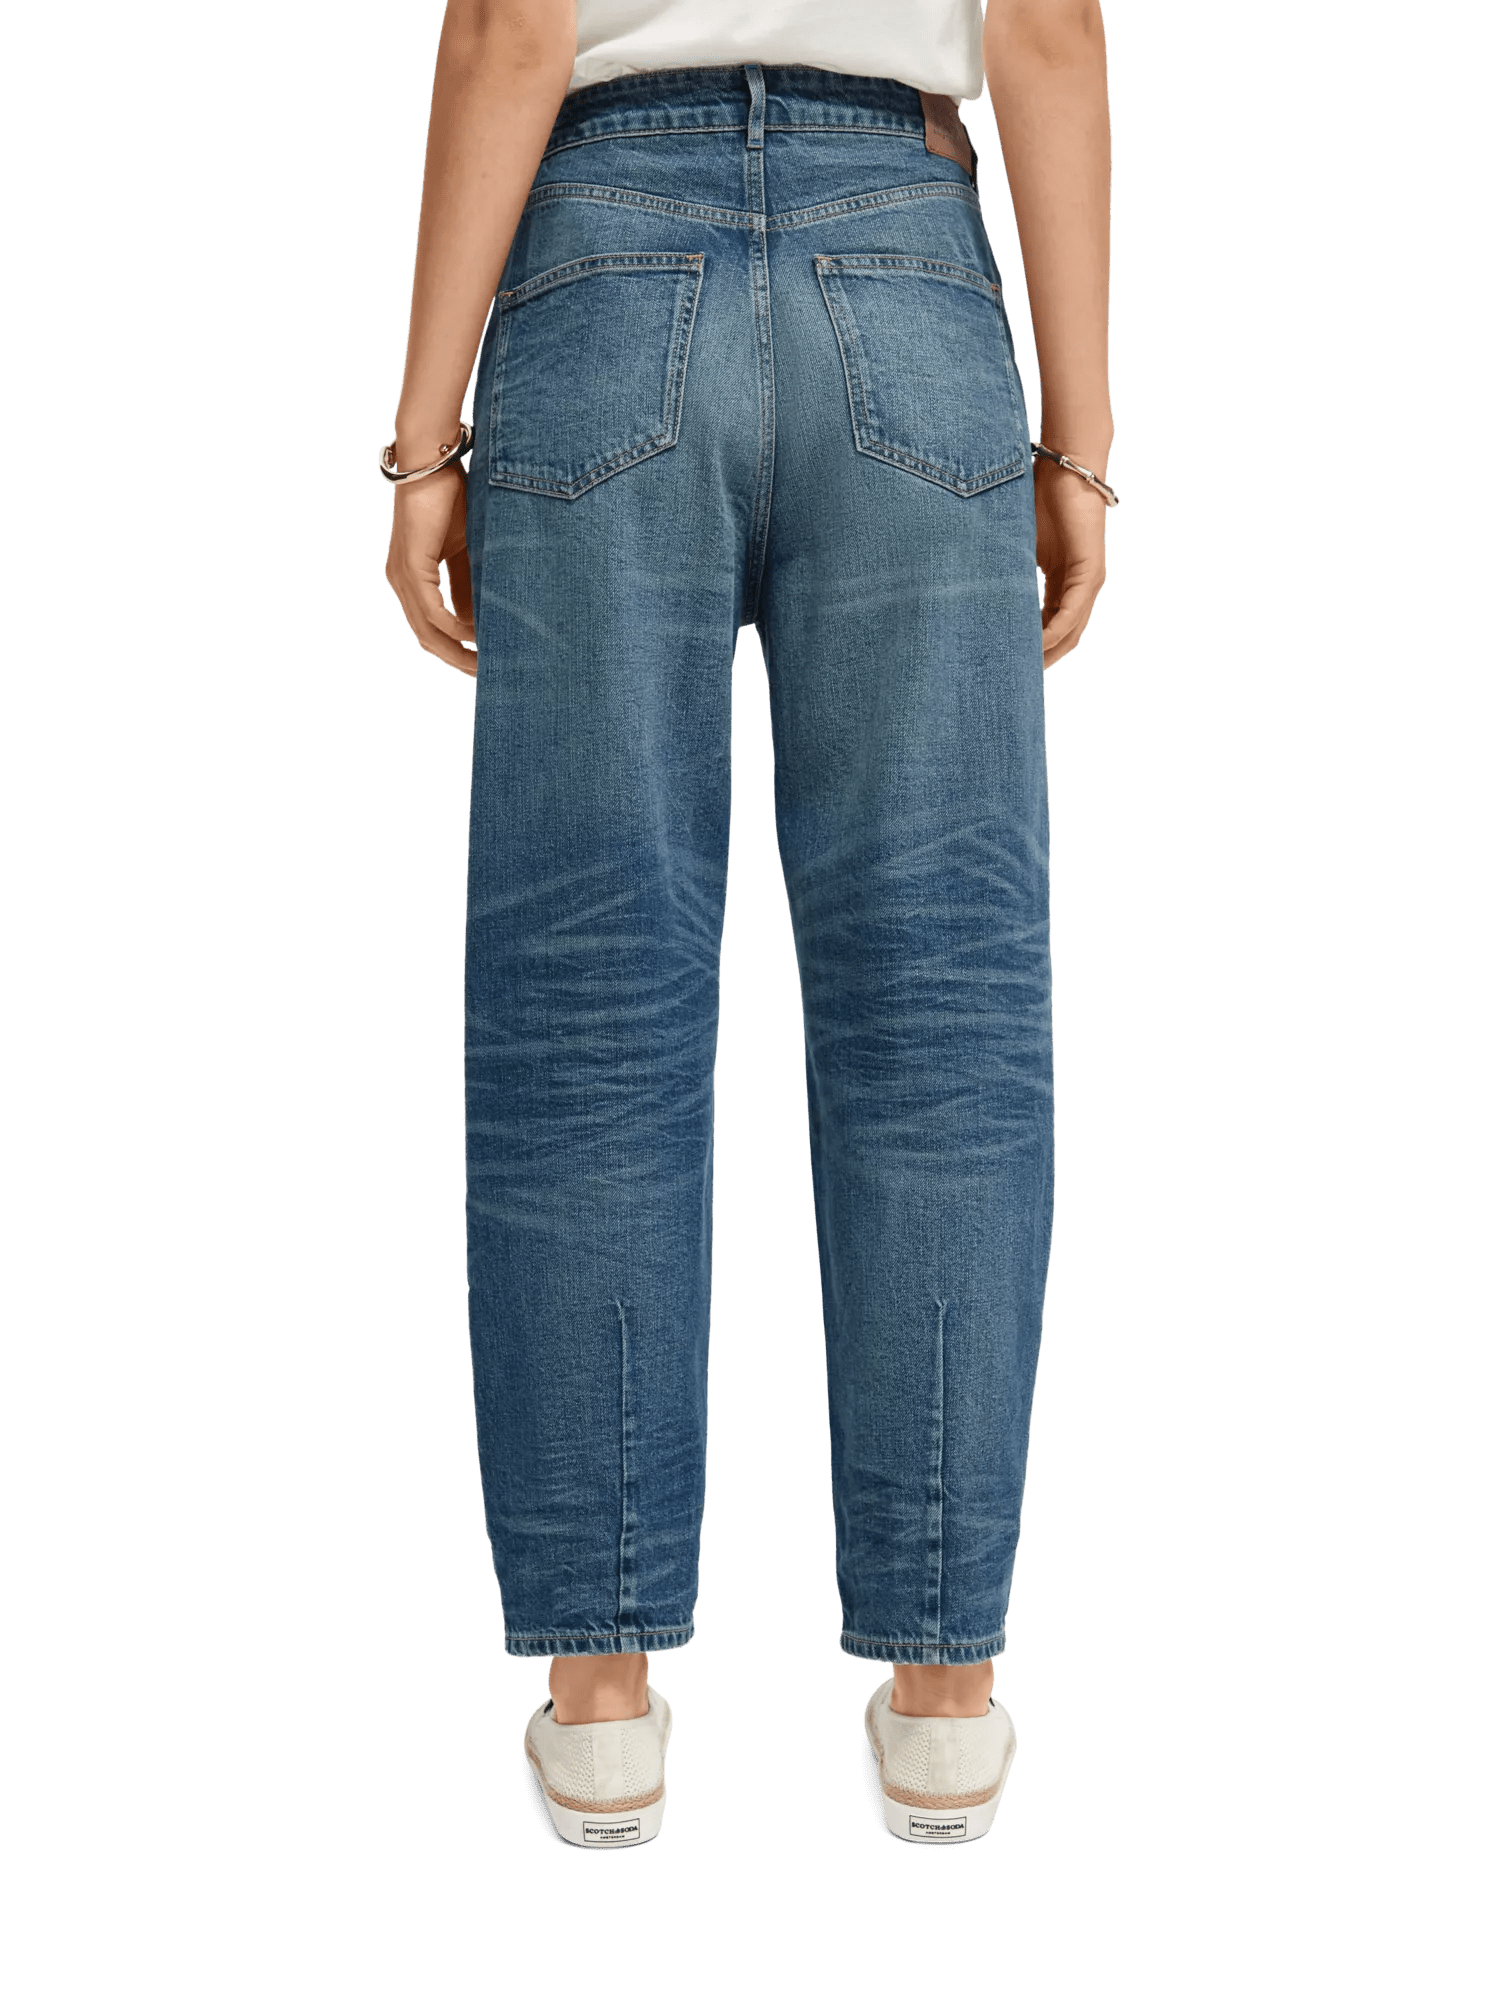 Scotch & Soda The Tide high-rise balloon fit jeans MDL-BCK